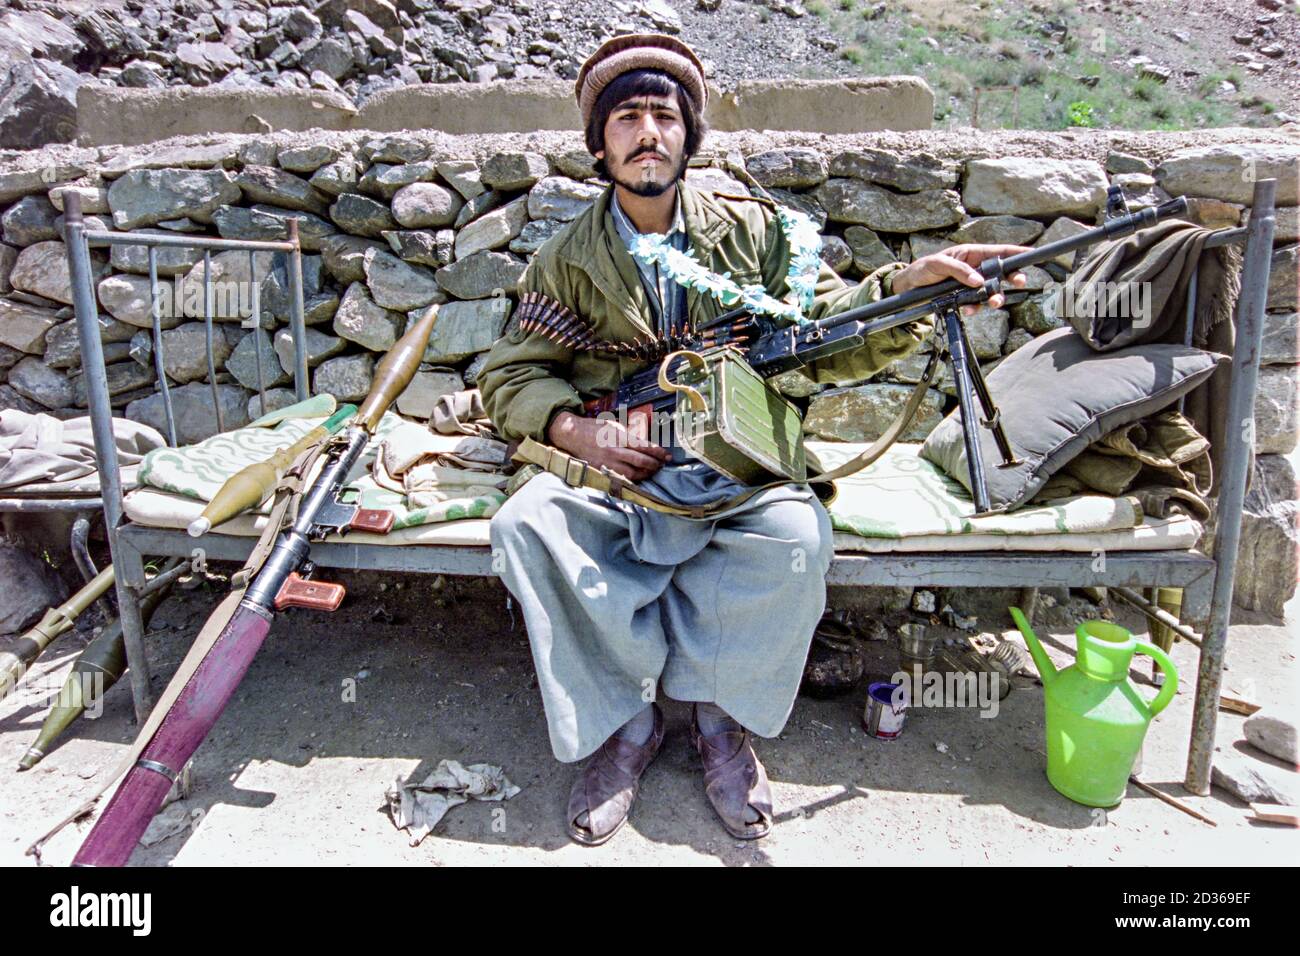 An Afghan mujahideen guerrilla fighter poses with his Soviet made PK machine gun and an RPG launcher at a rebel base during the Afghan Civil War May 11, 1989 in the Paghman Valley, Afghanistan. Stock Photo